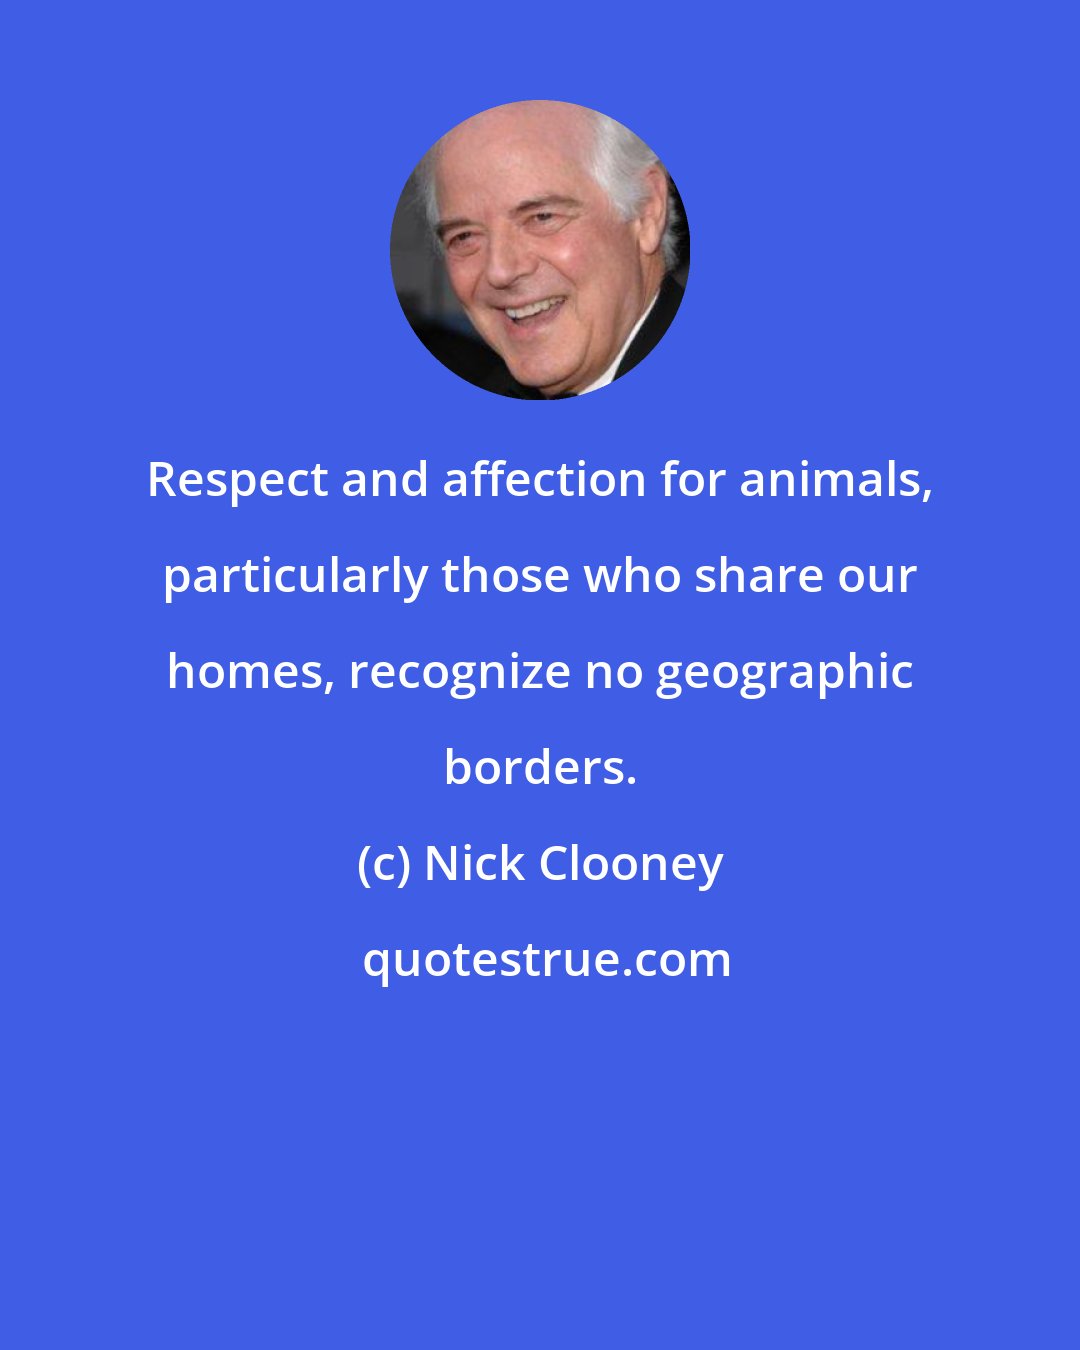 Nick Clooney: Respect and affection for animals, particularly those who share our homes, recognize no geographic borders.